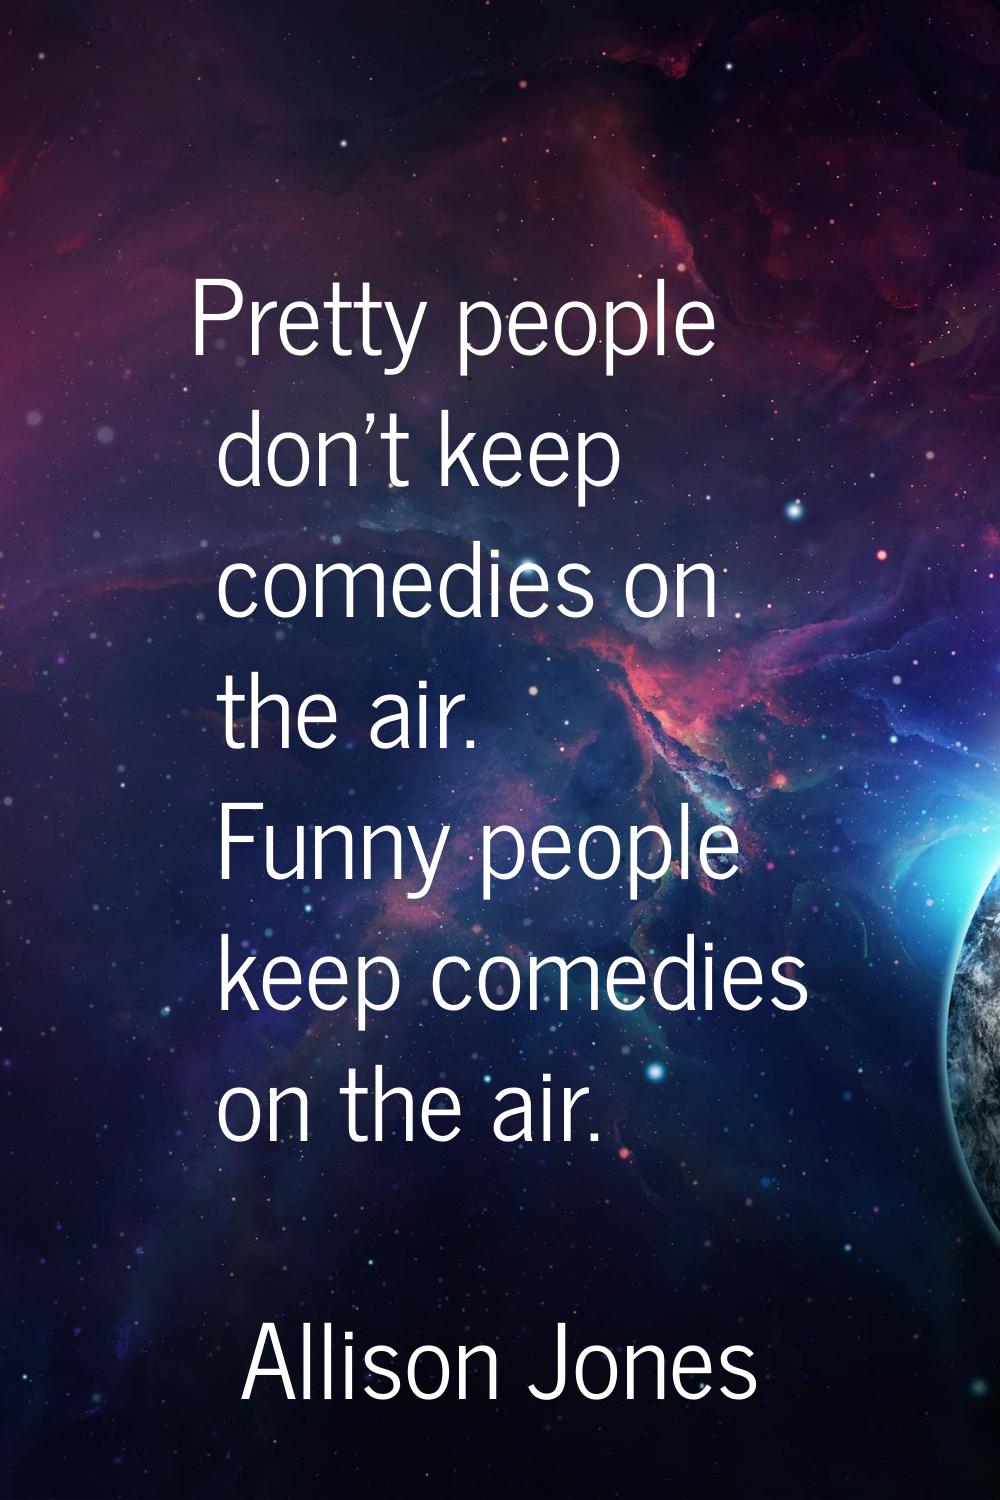 Pretty people don't keep comedies on the air. Funny people keep comedies on the air.